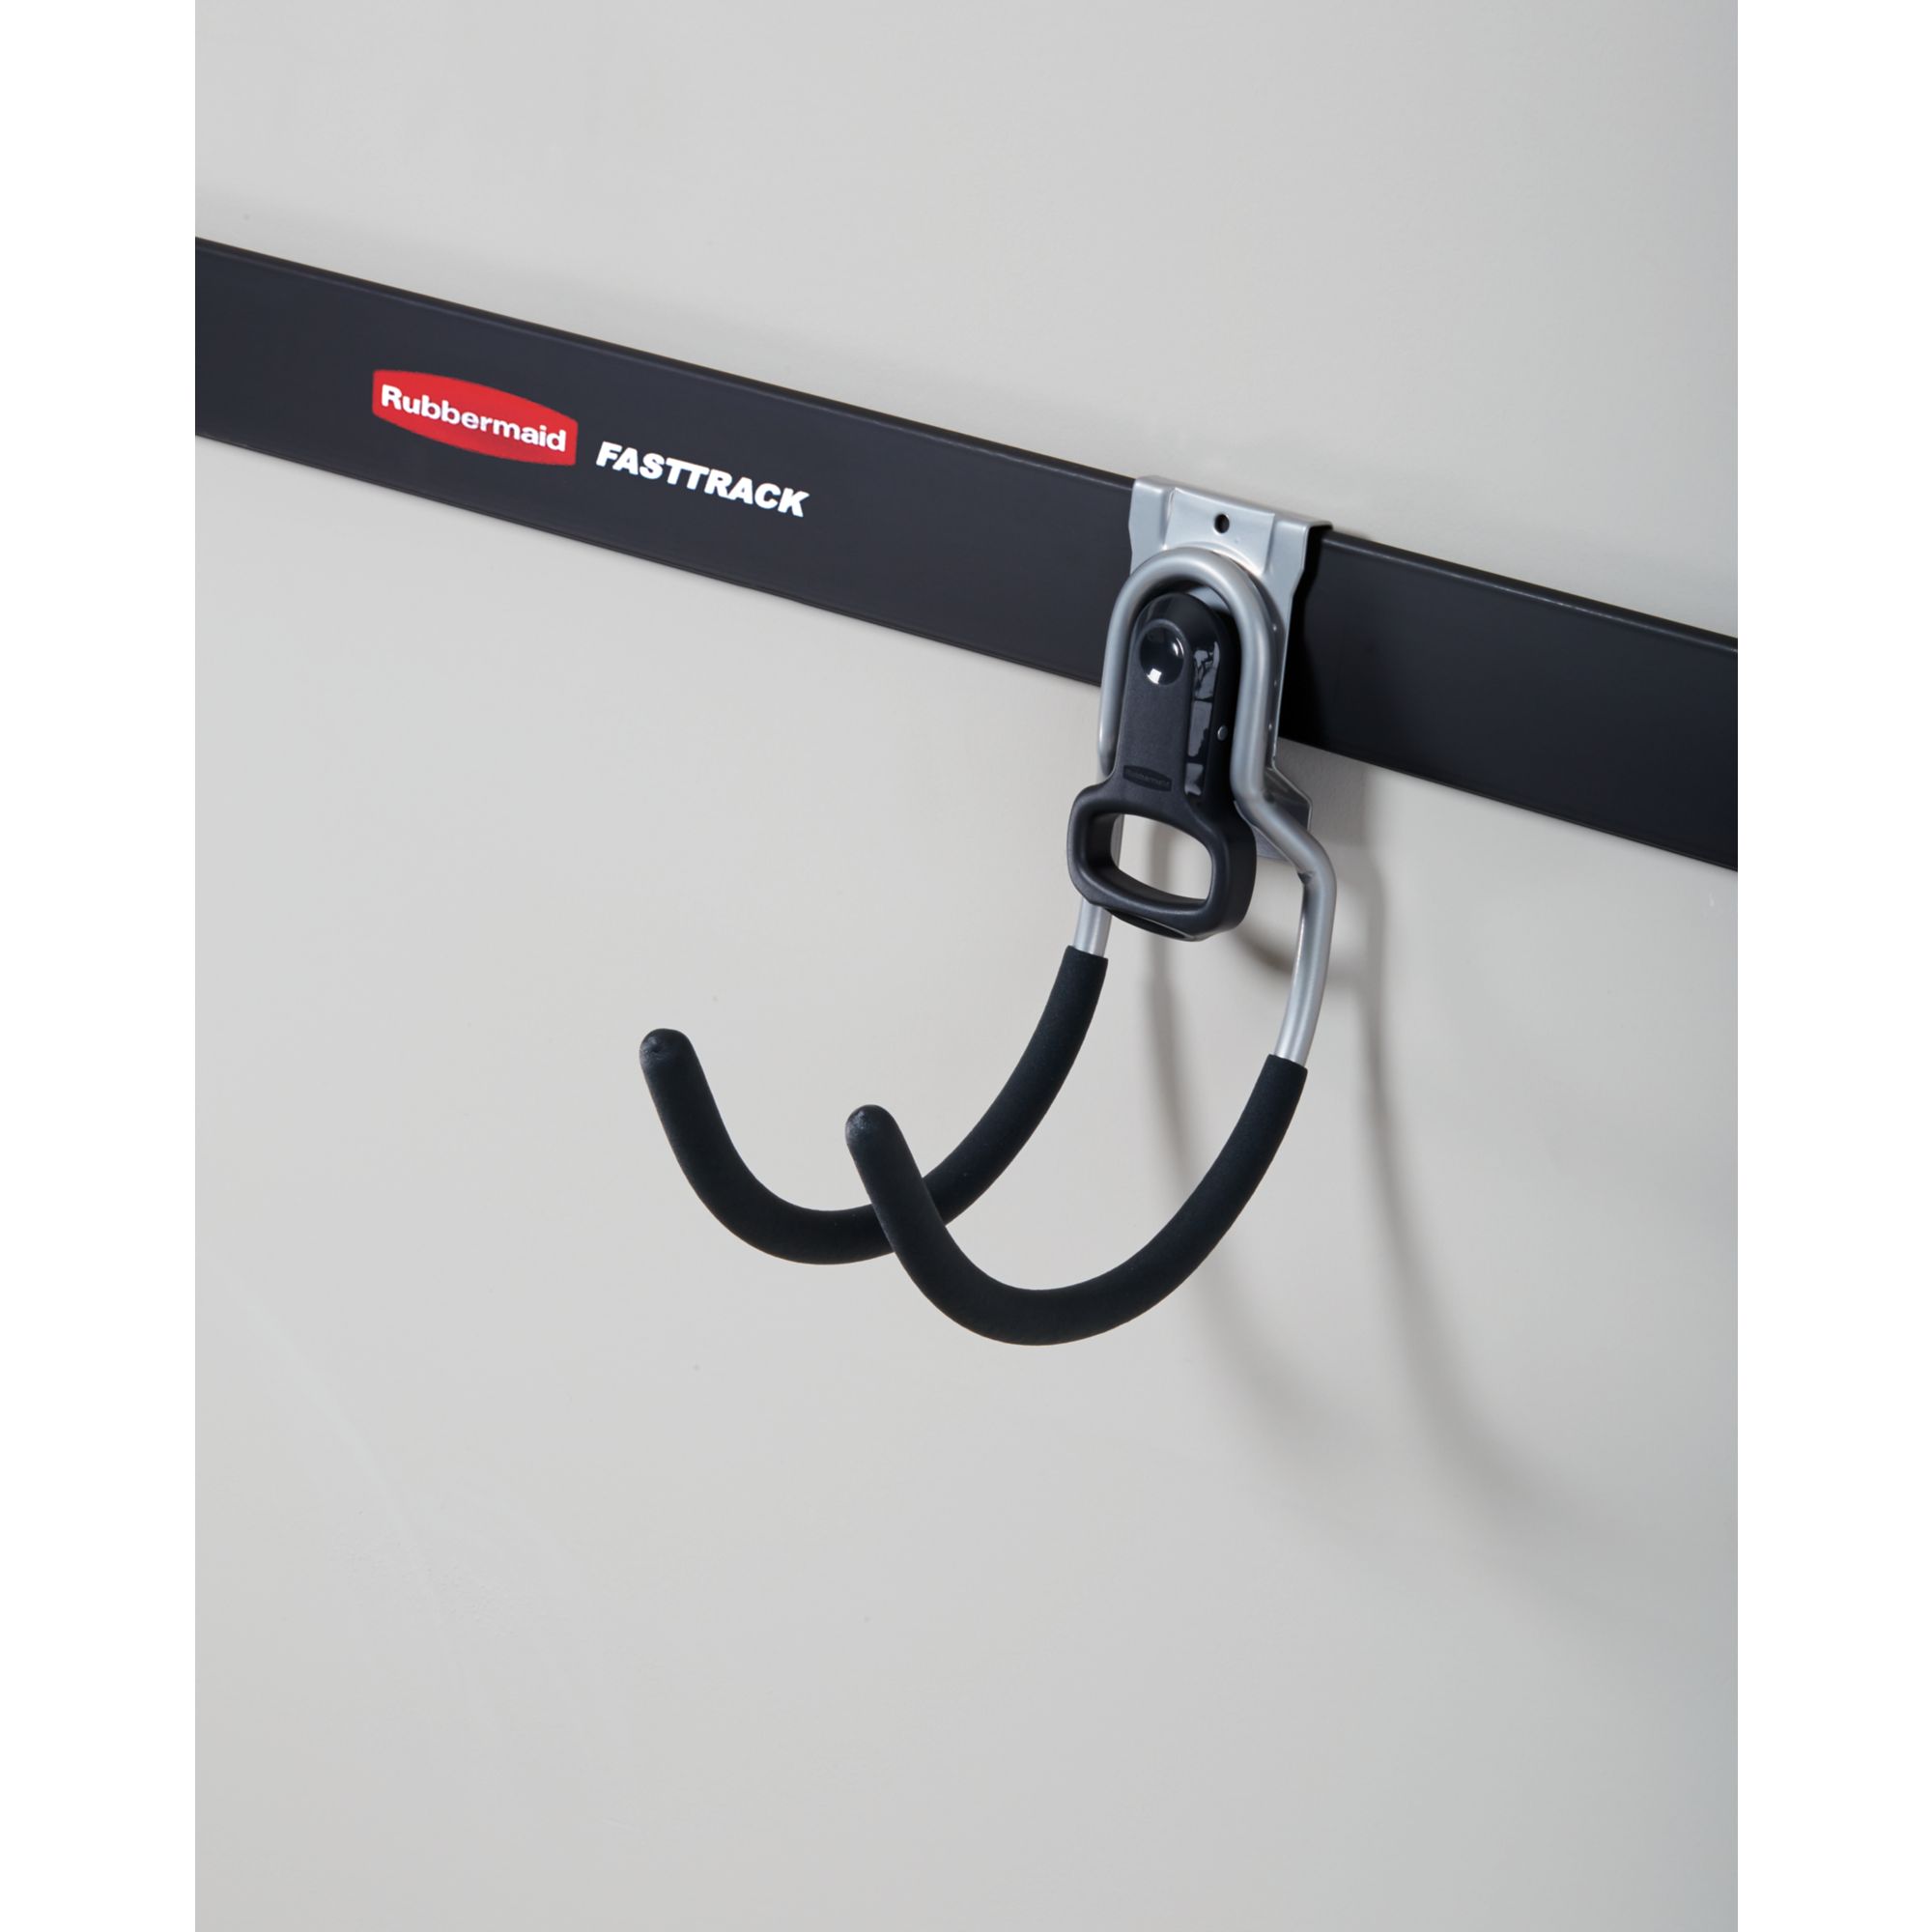 Rubbermaid FastTrack 2 Wall Mount Storage Rail + 4 Utility Hook + 4 S Hook  Rack, 1 Piece - Dillons Food Stores